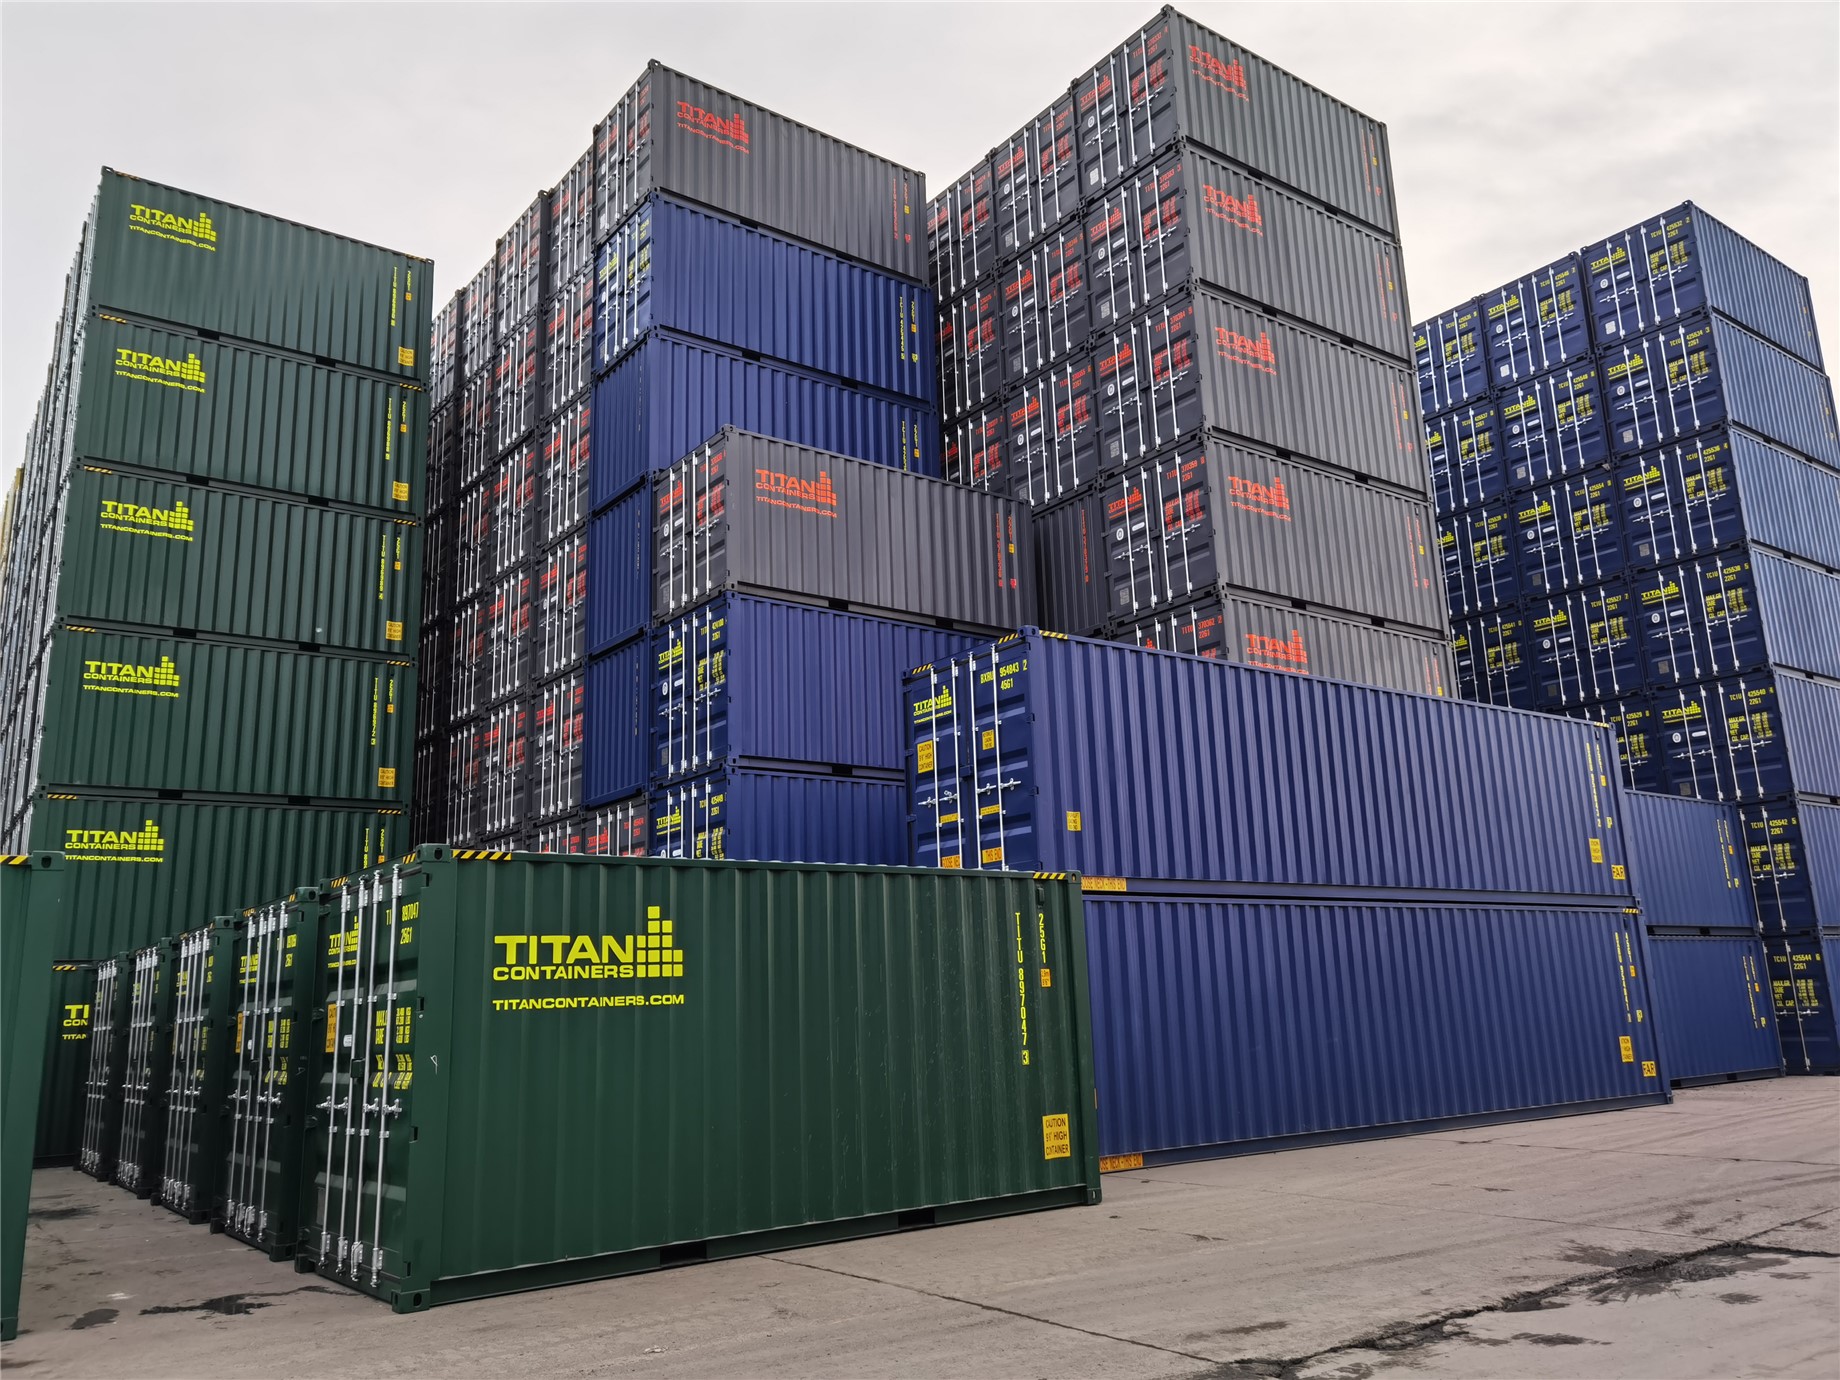 TITAN Shipping Containers stack - TITAN Containers